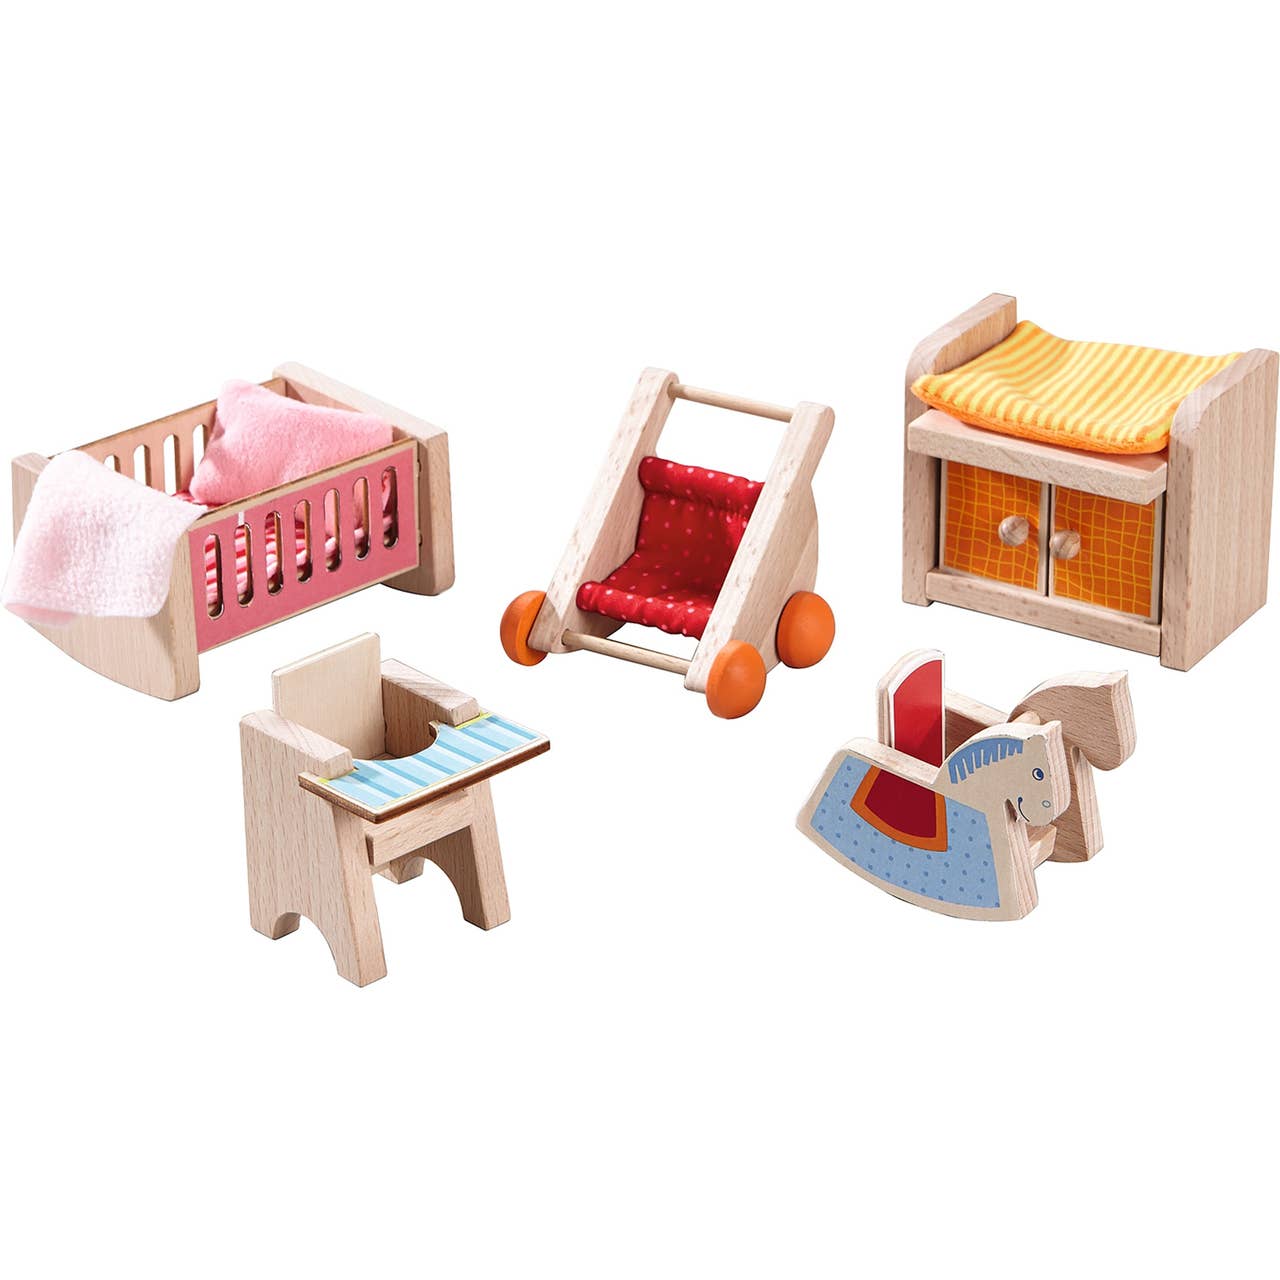 Dollhouse Furniture - Baby's Room